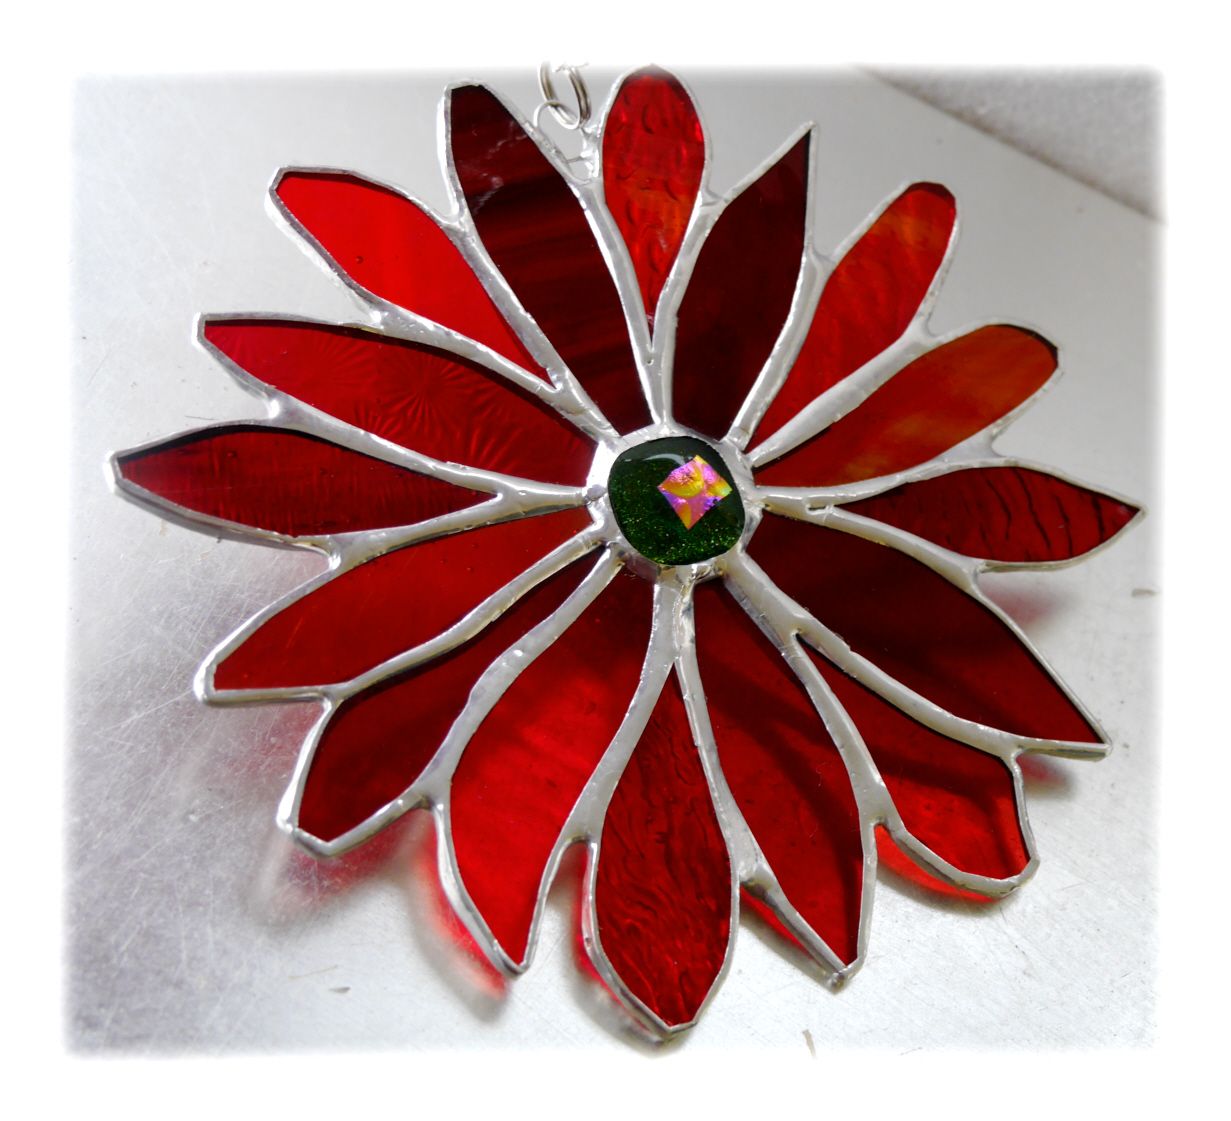 RED Fire Flower 001 #1904 FREE 17.50